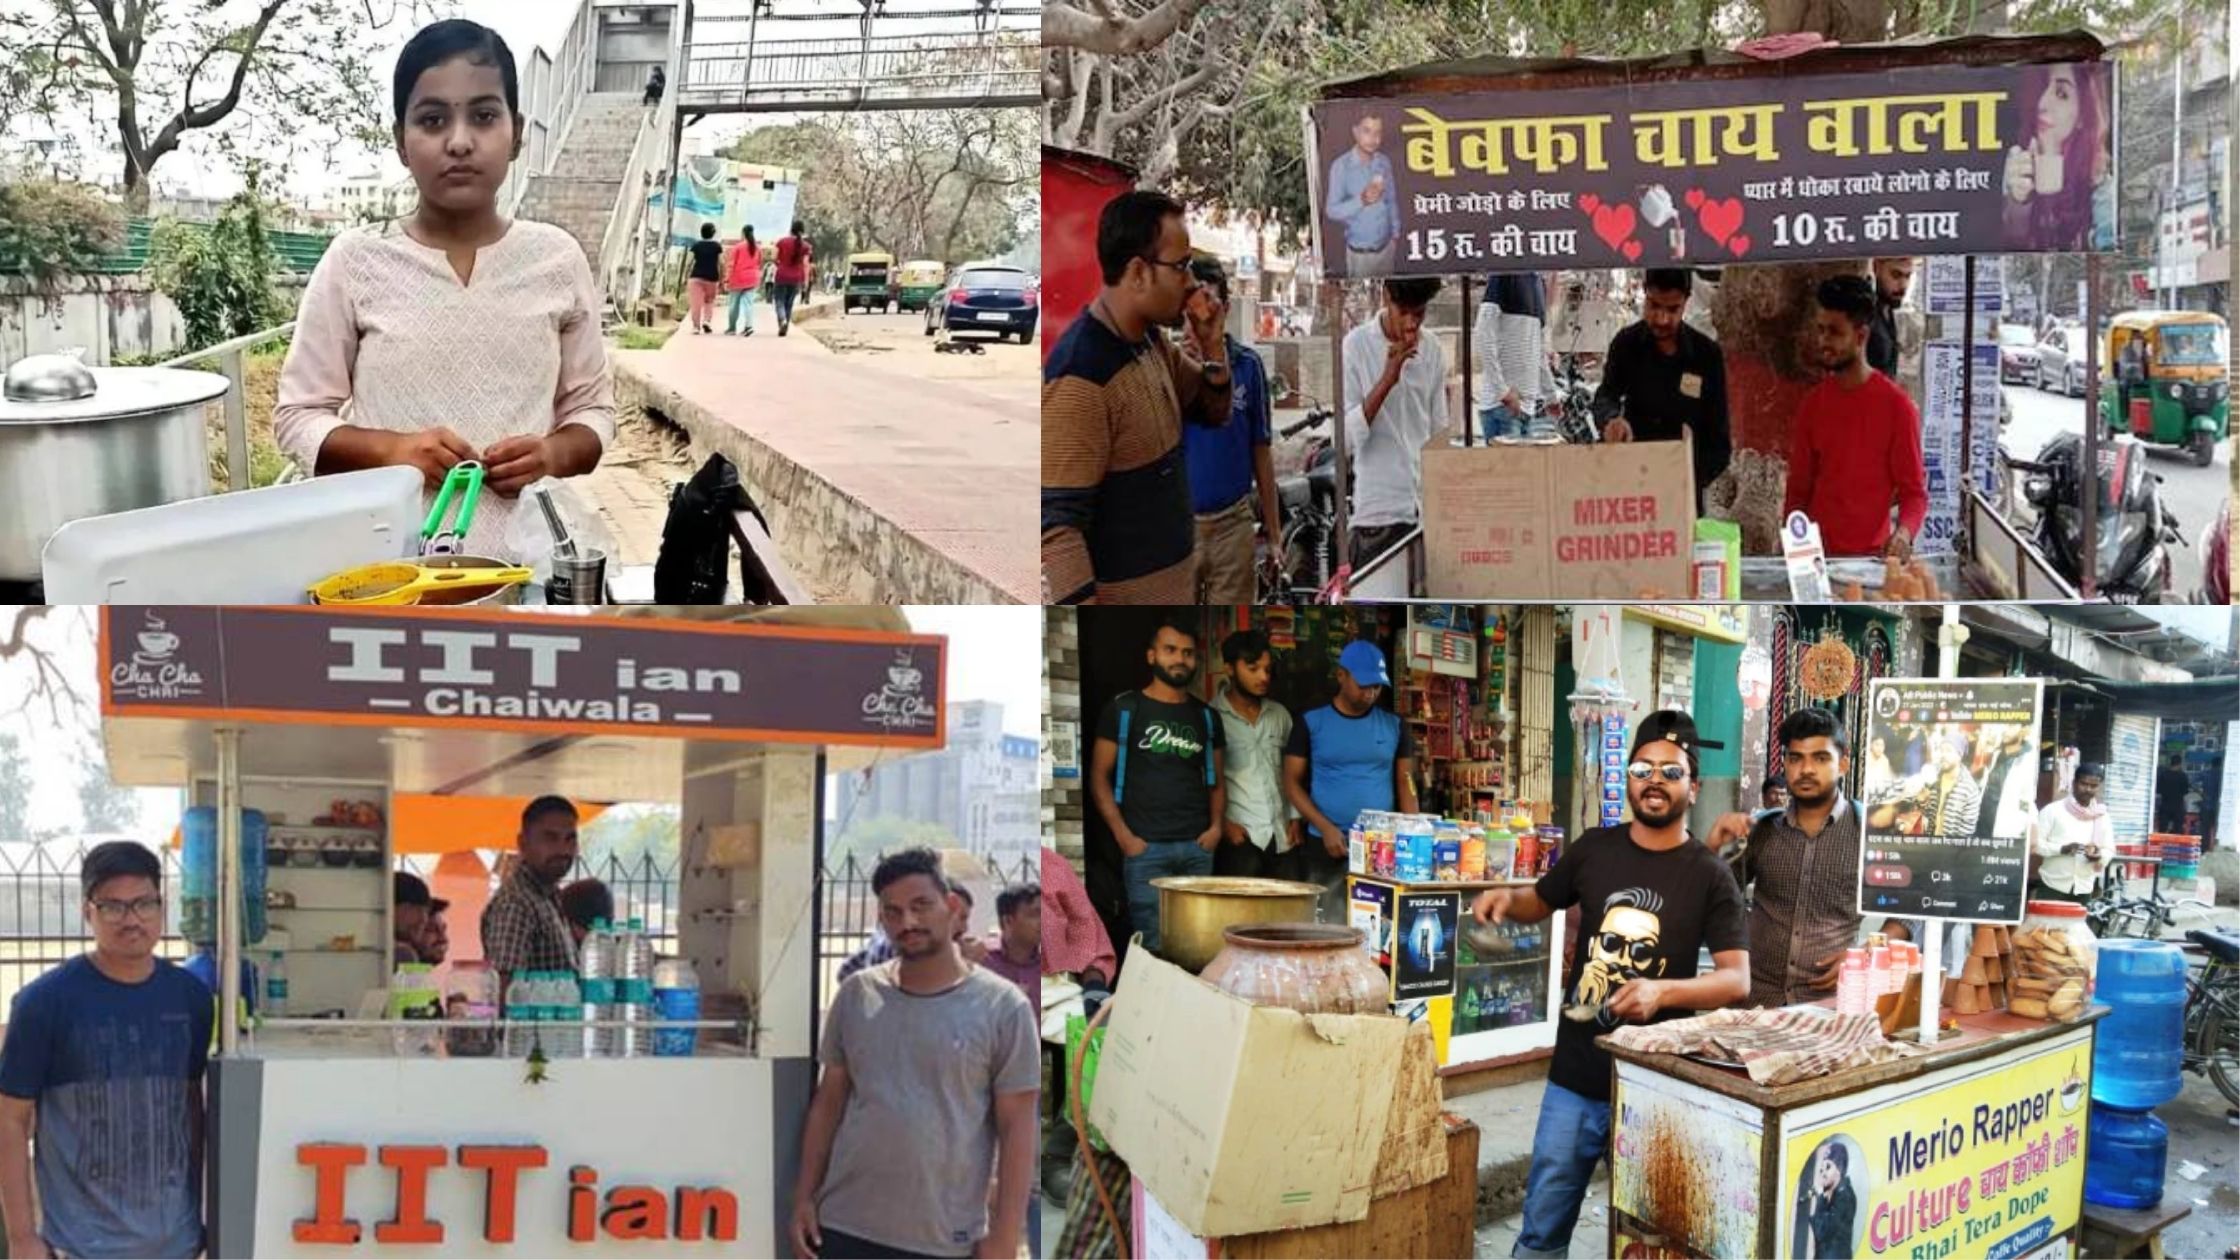 These chai walas went viral on social media overnight